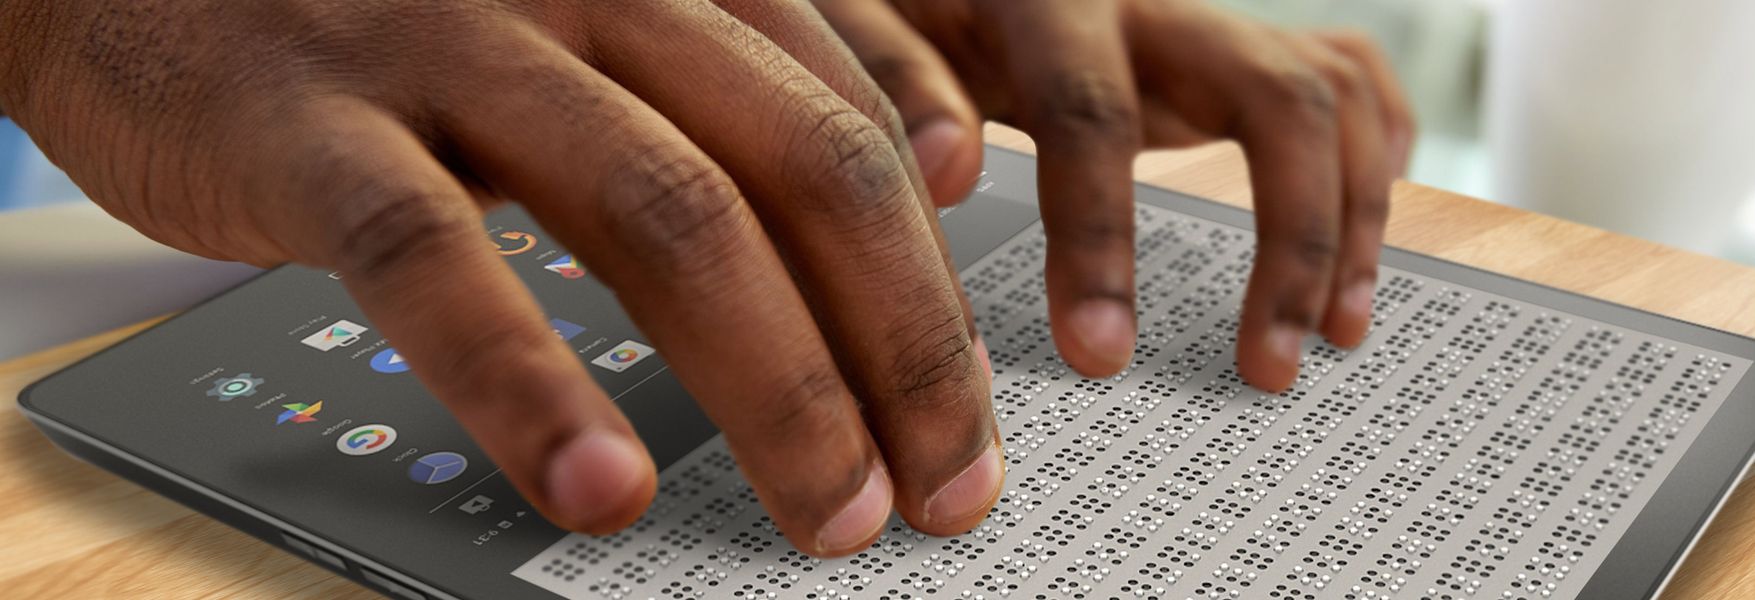 5 Examples of Technology for the Blind: Beyond Braille | OpenMind